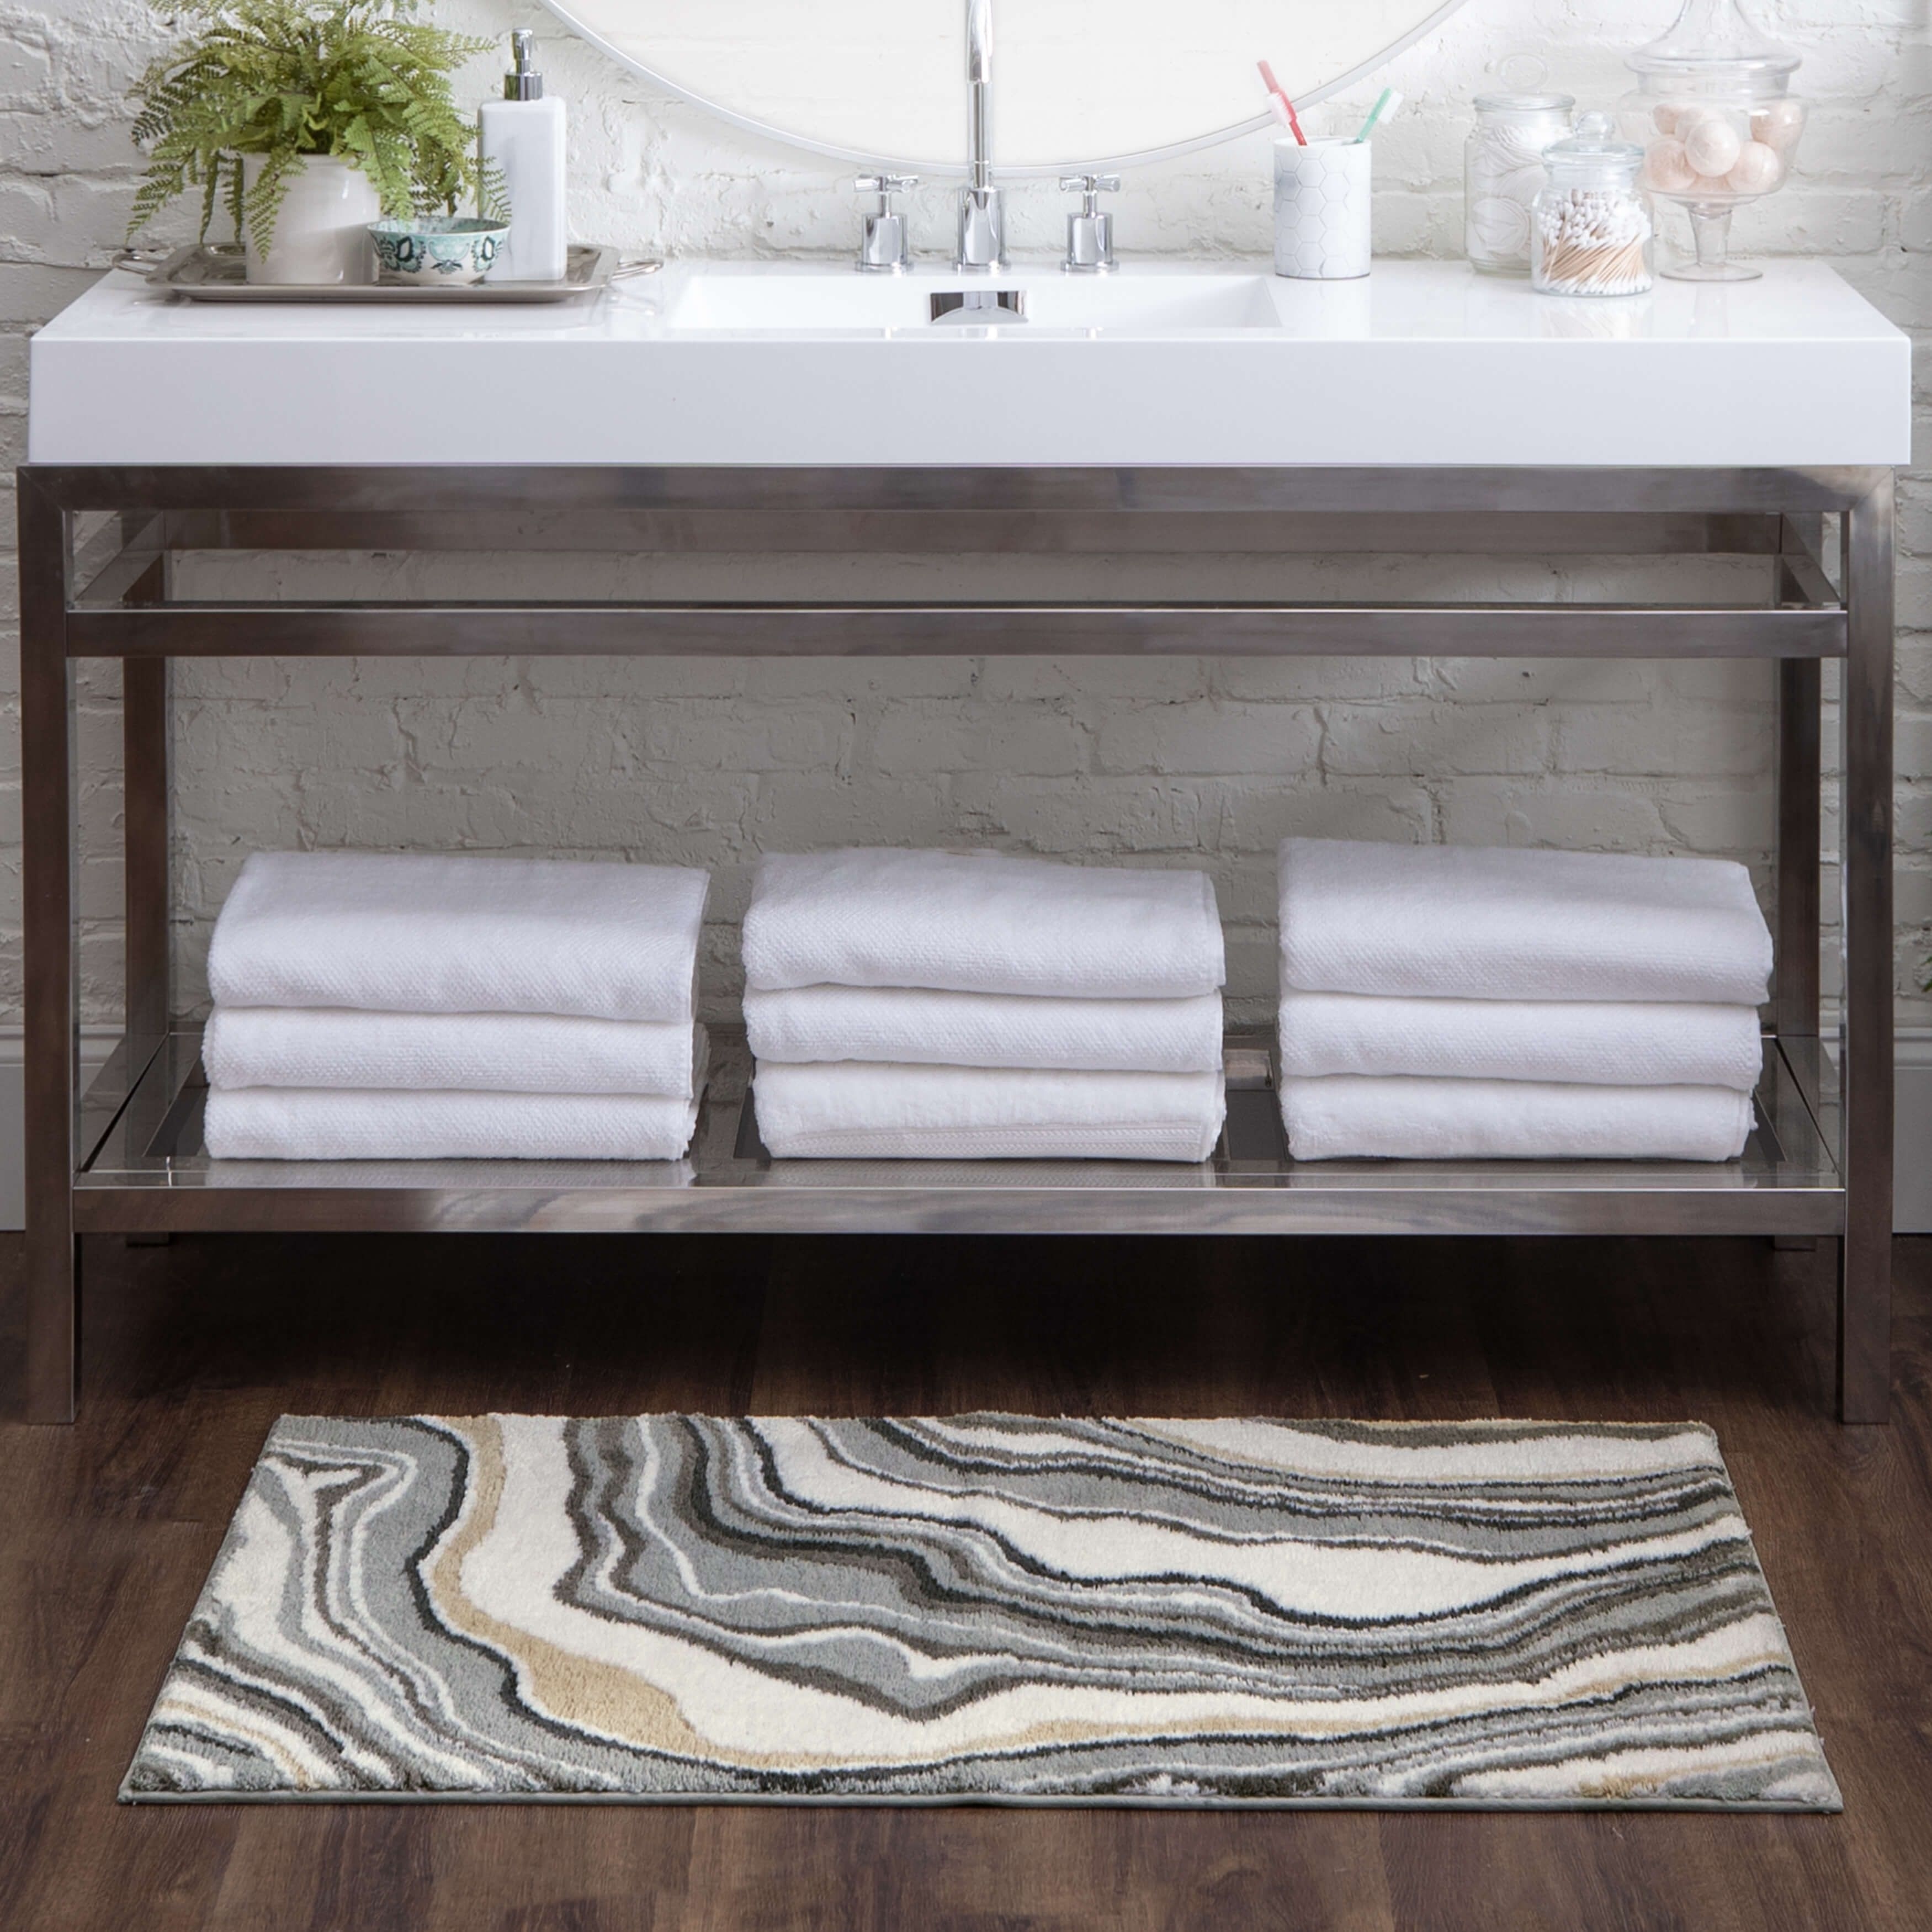 https://ak1.ostkcdn.com/images/products/is/images/direct/b279f806e86bc82a9d6359d0d385dce2daa137a5/Mohawk-Home-Serpentine-Bath-Rug.jpg